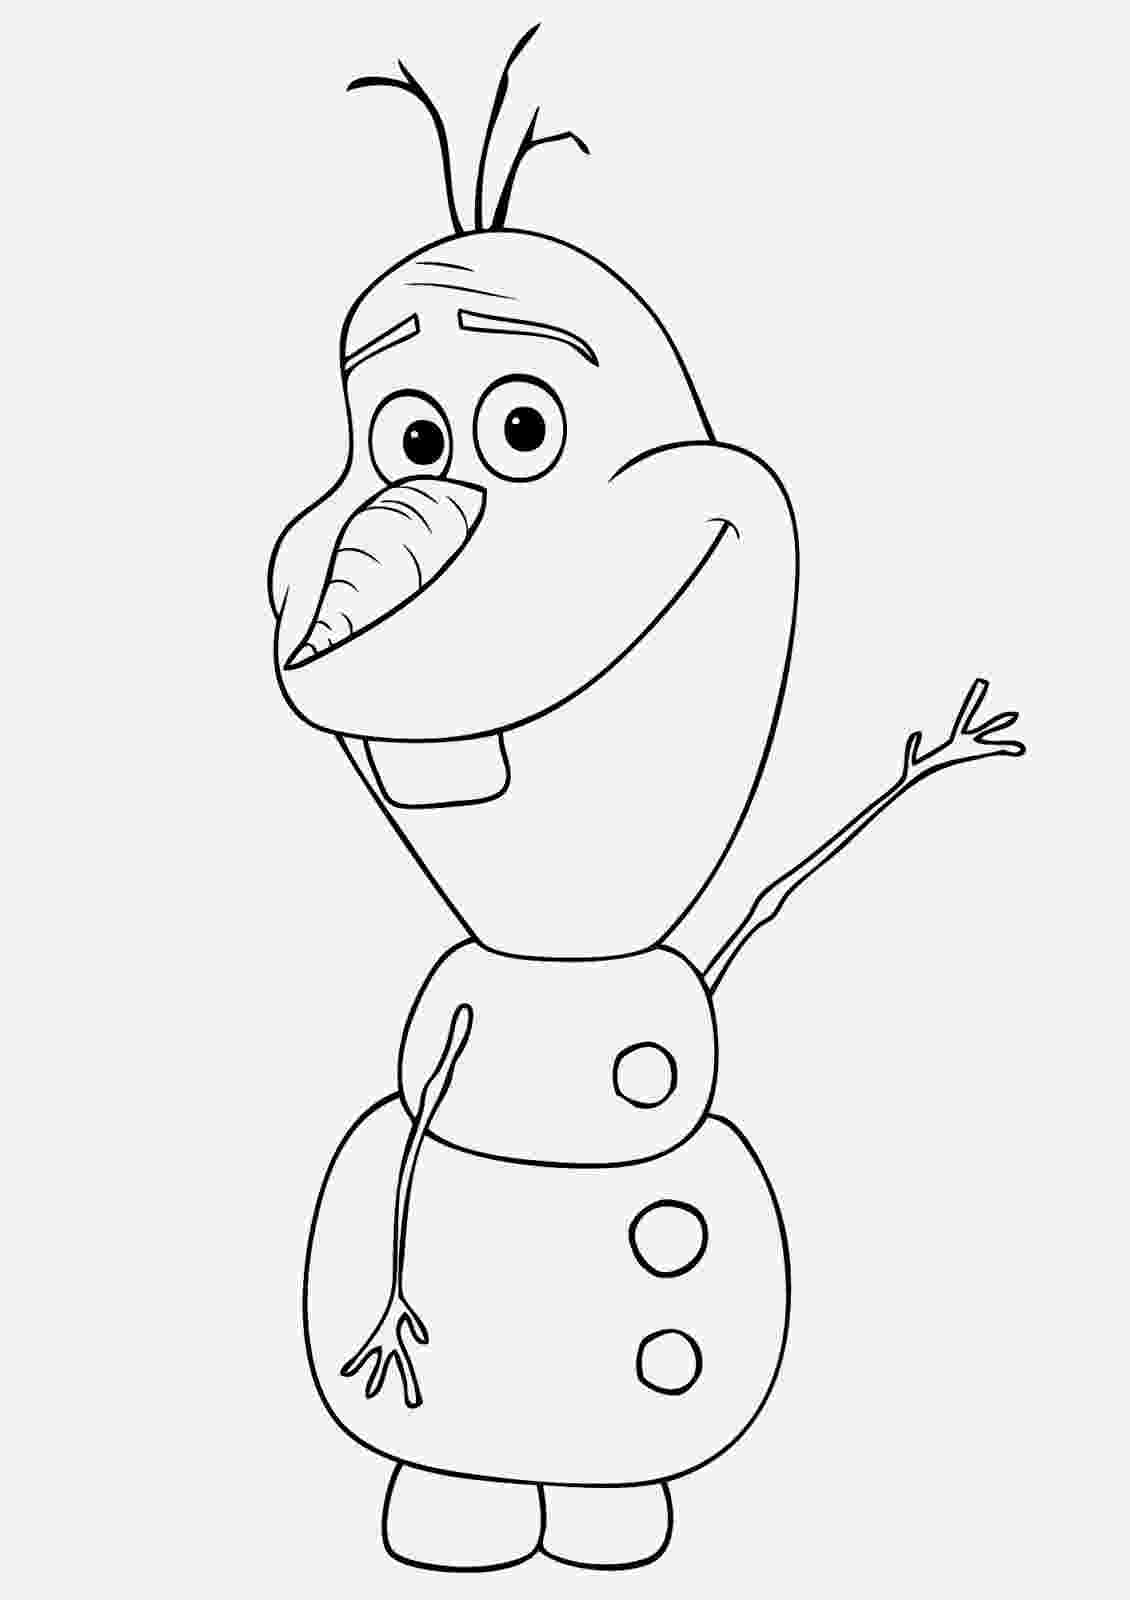 olaf colouring pages frozens olaf coloring pages best coloring pages for kids olaf pages colouring 